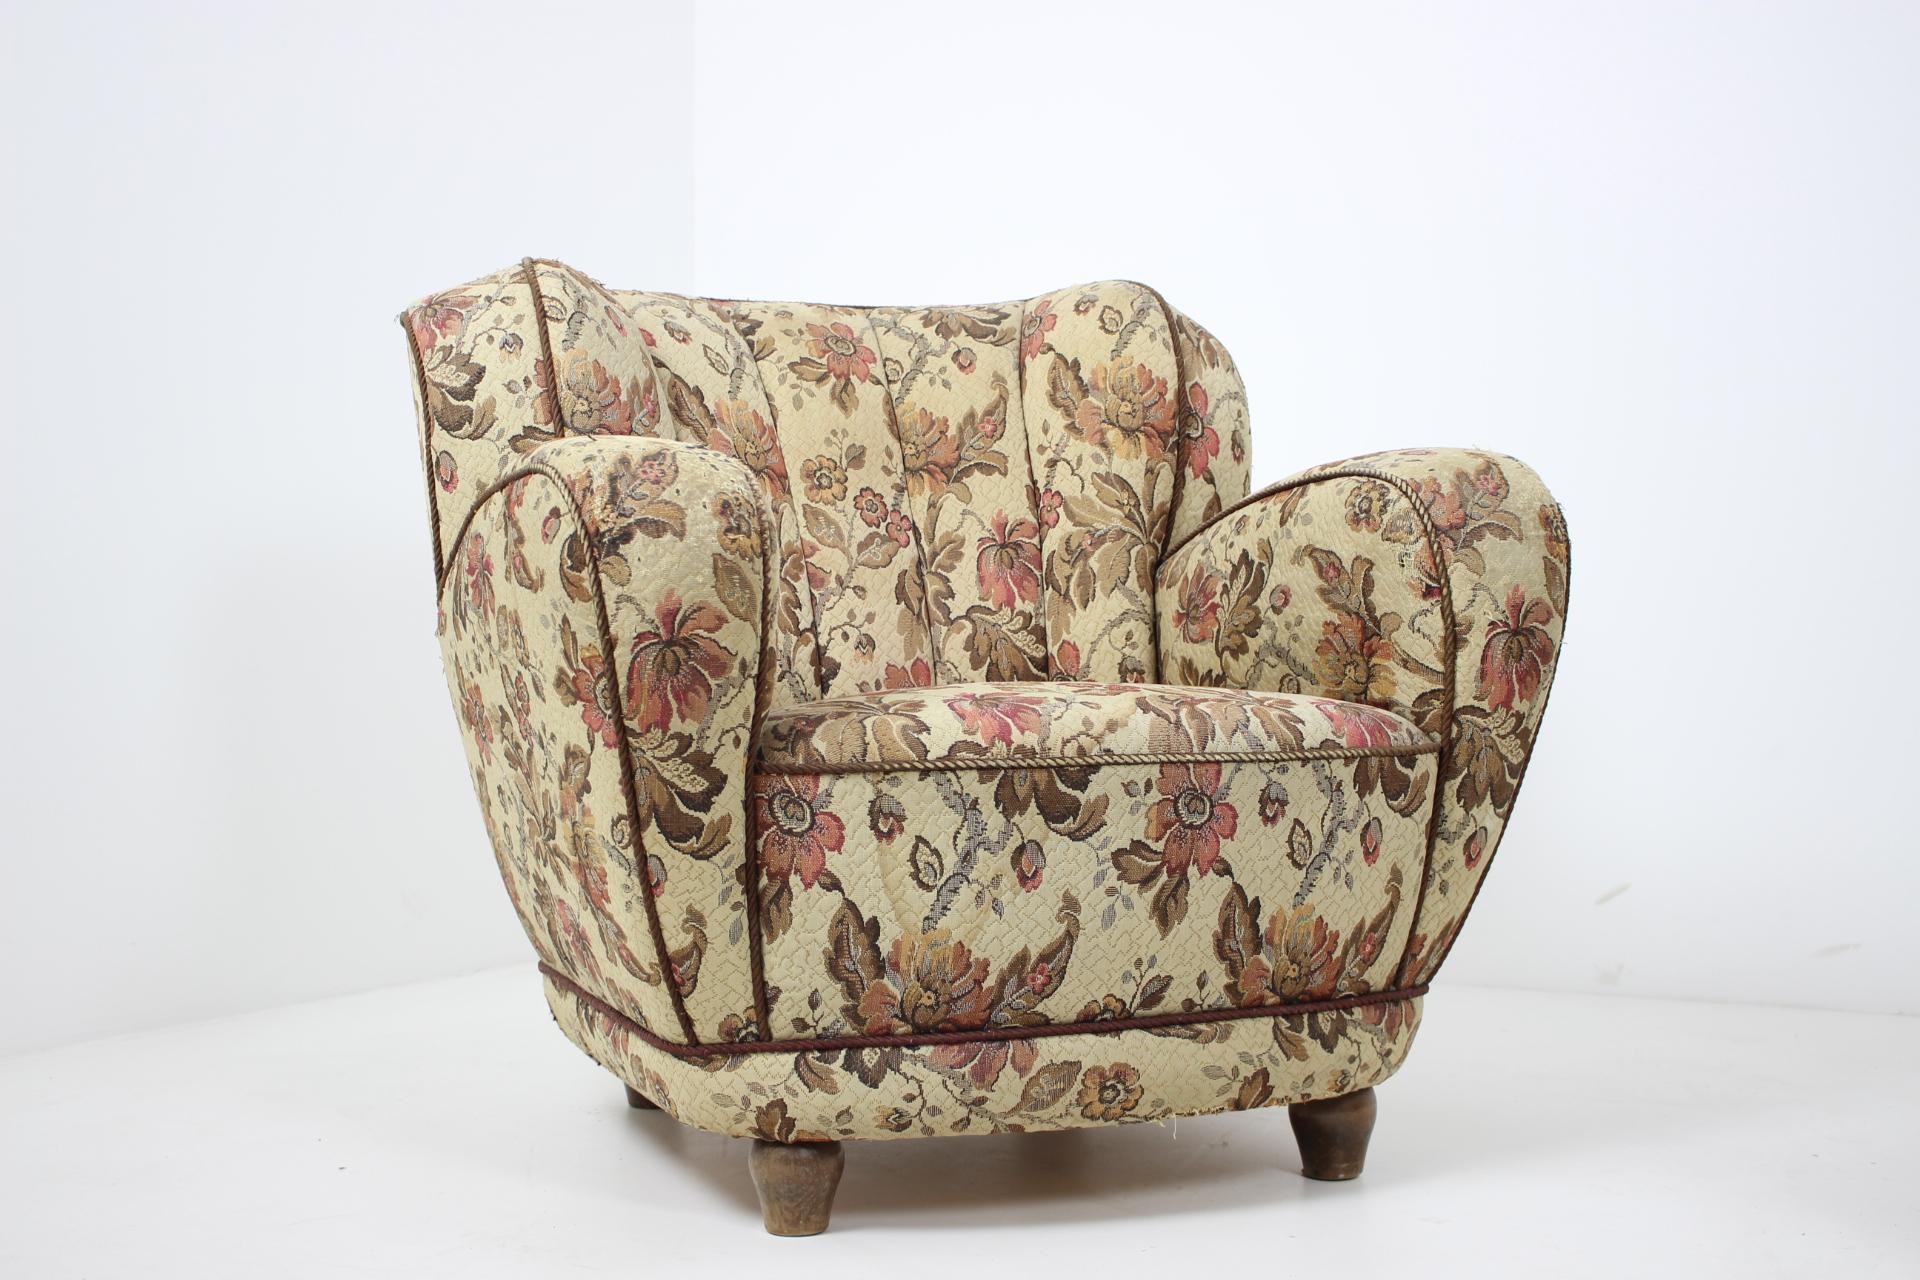 - Czechoslovakia,
- circa 1920-1930s
- Good original condition
- Very interesting model
- Suitable for a new upholstery.